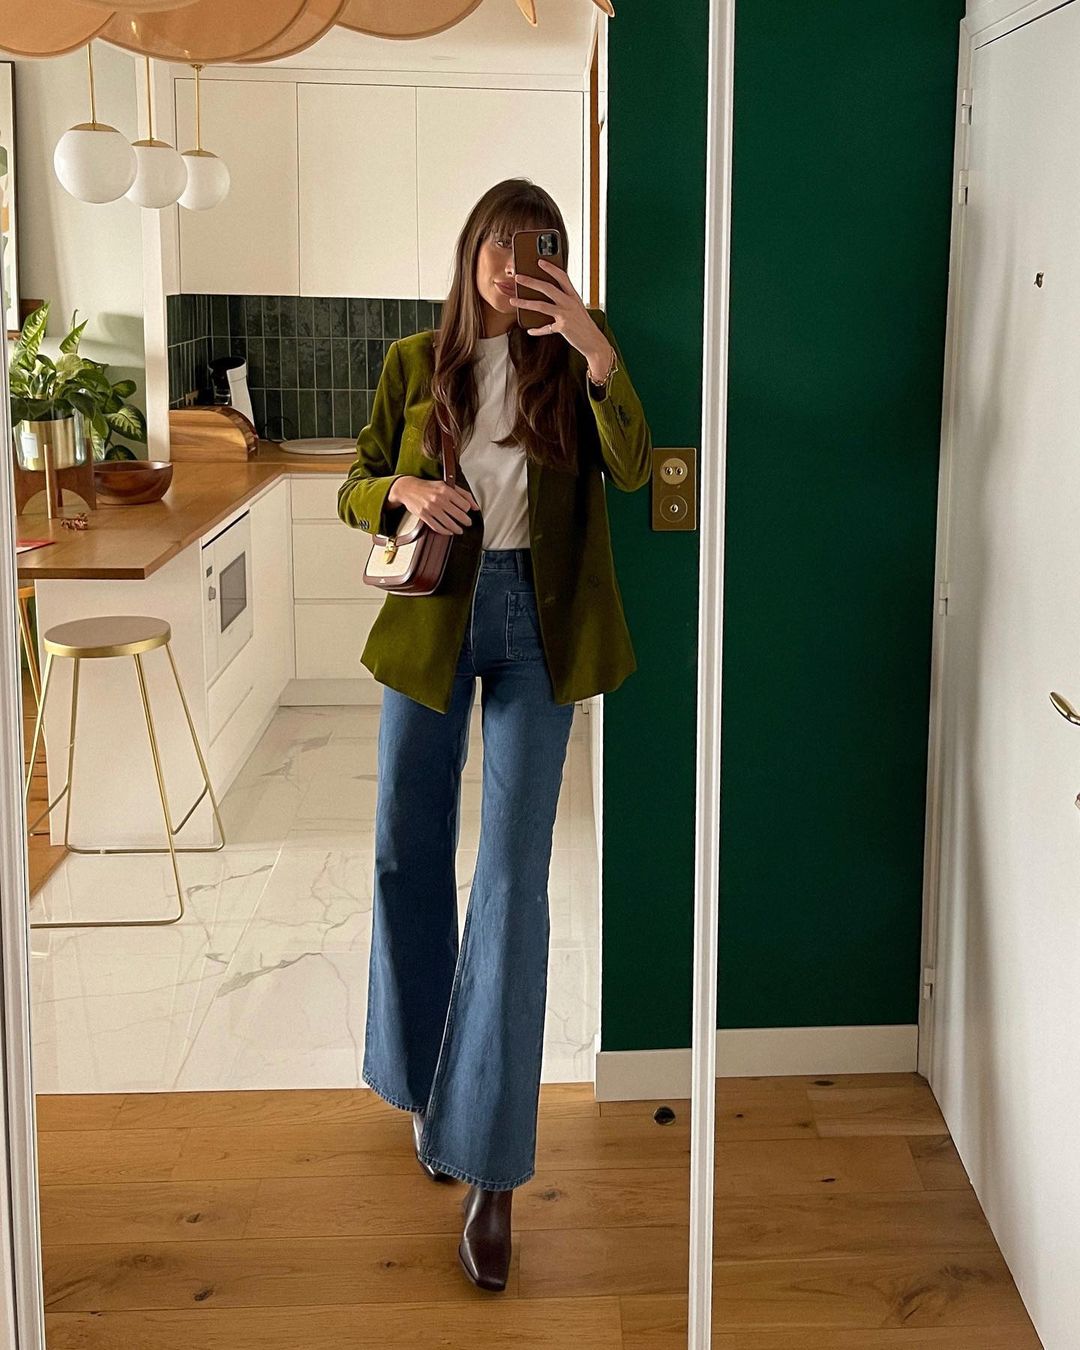 Summer 2022 Jeans Trends: @juliesfi wears a pair of jeans with patch pockets